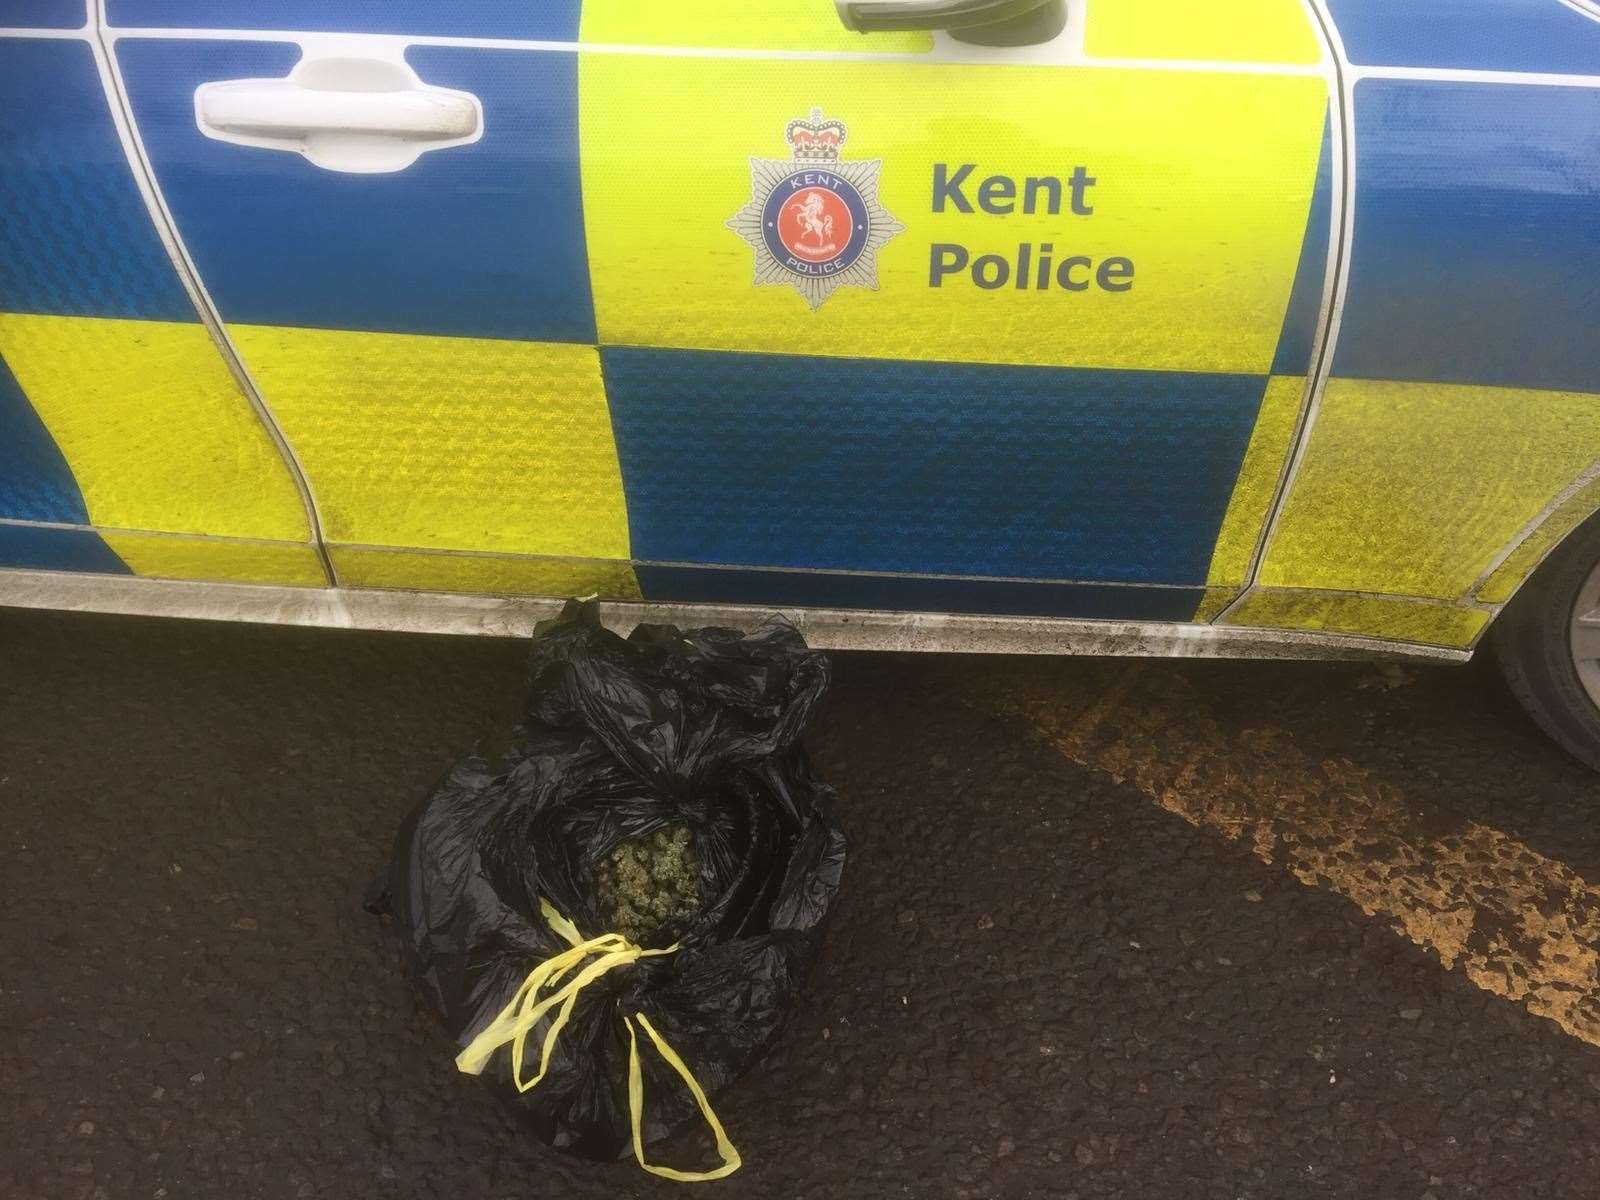 Kent Police has released a picture of some of the cannabis Picture: @kentpoliceroads